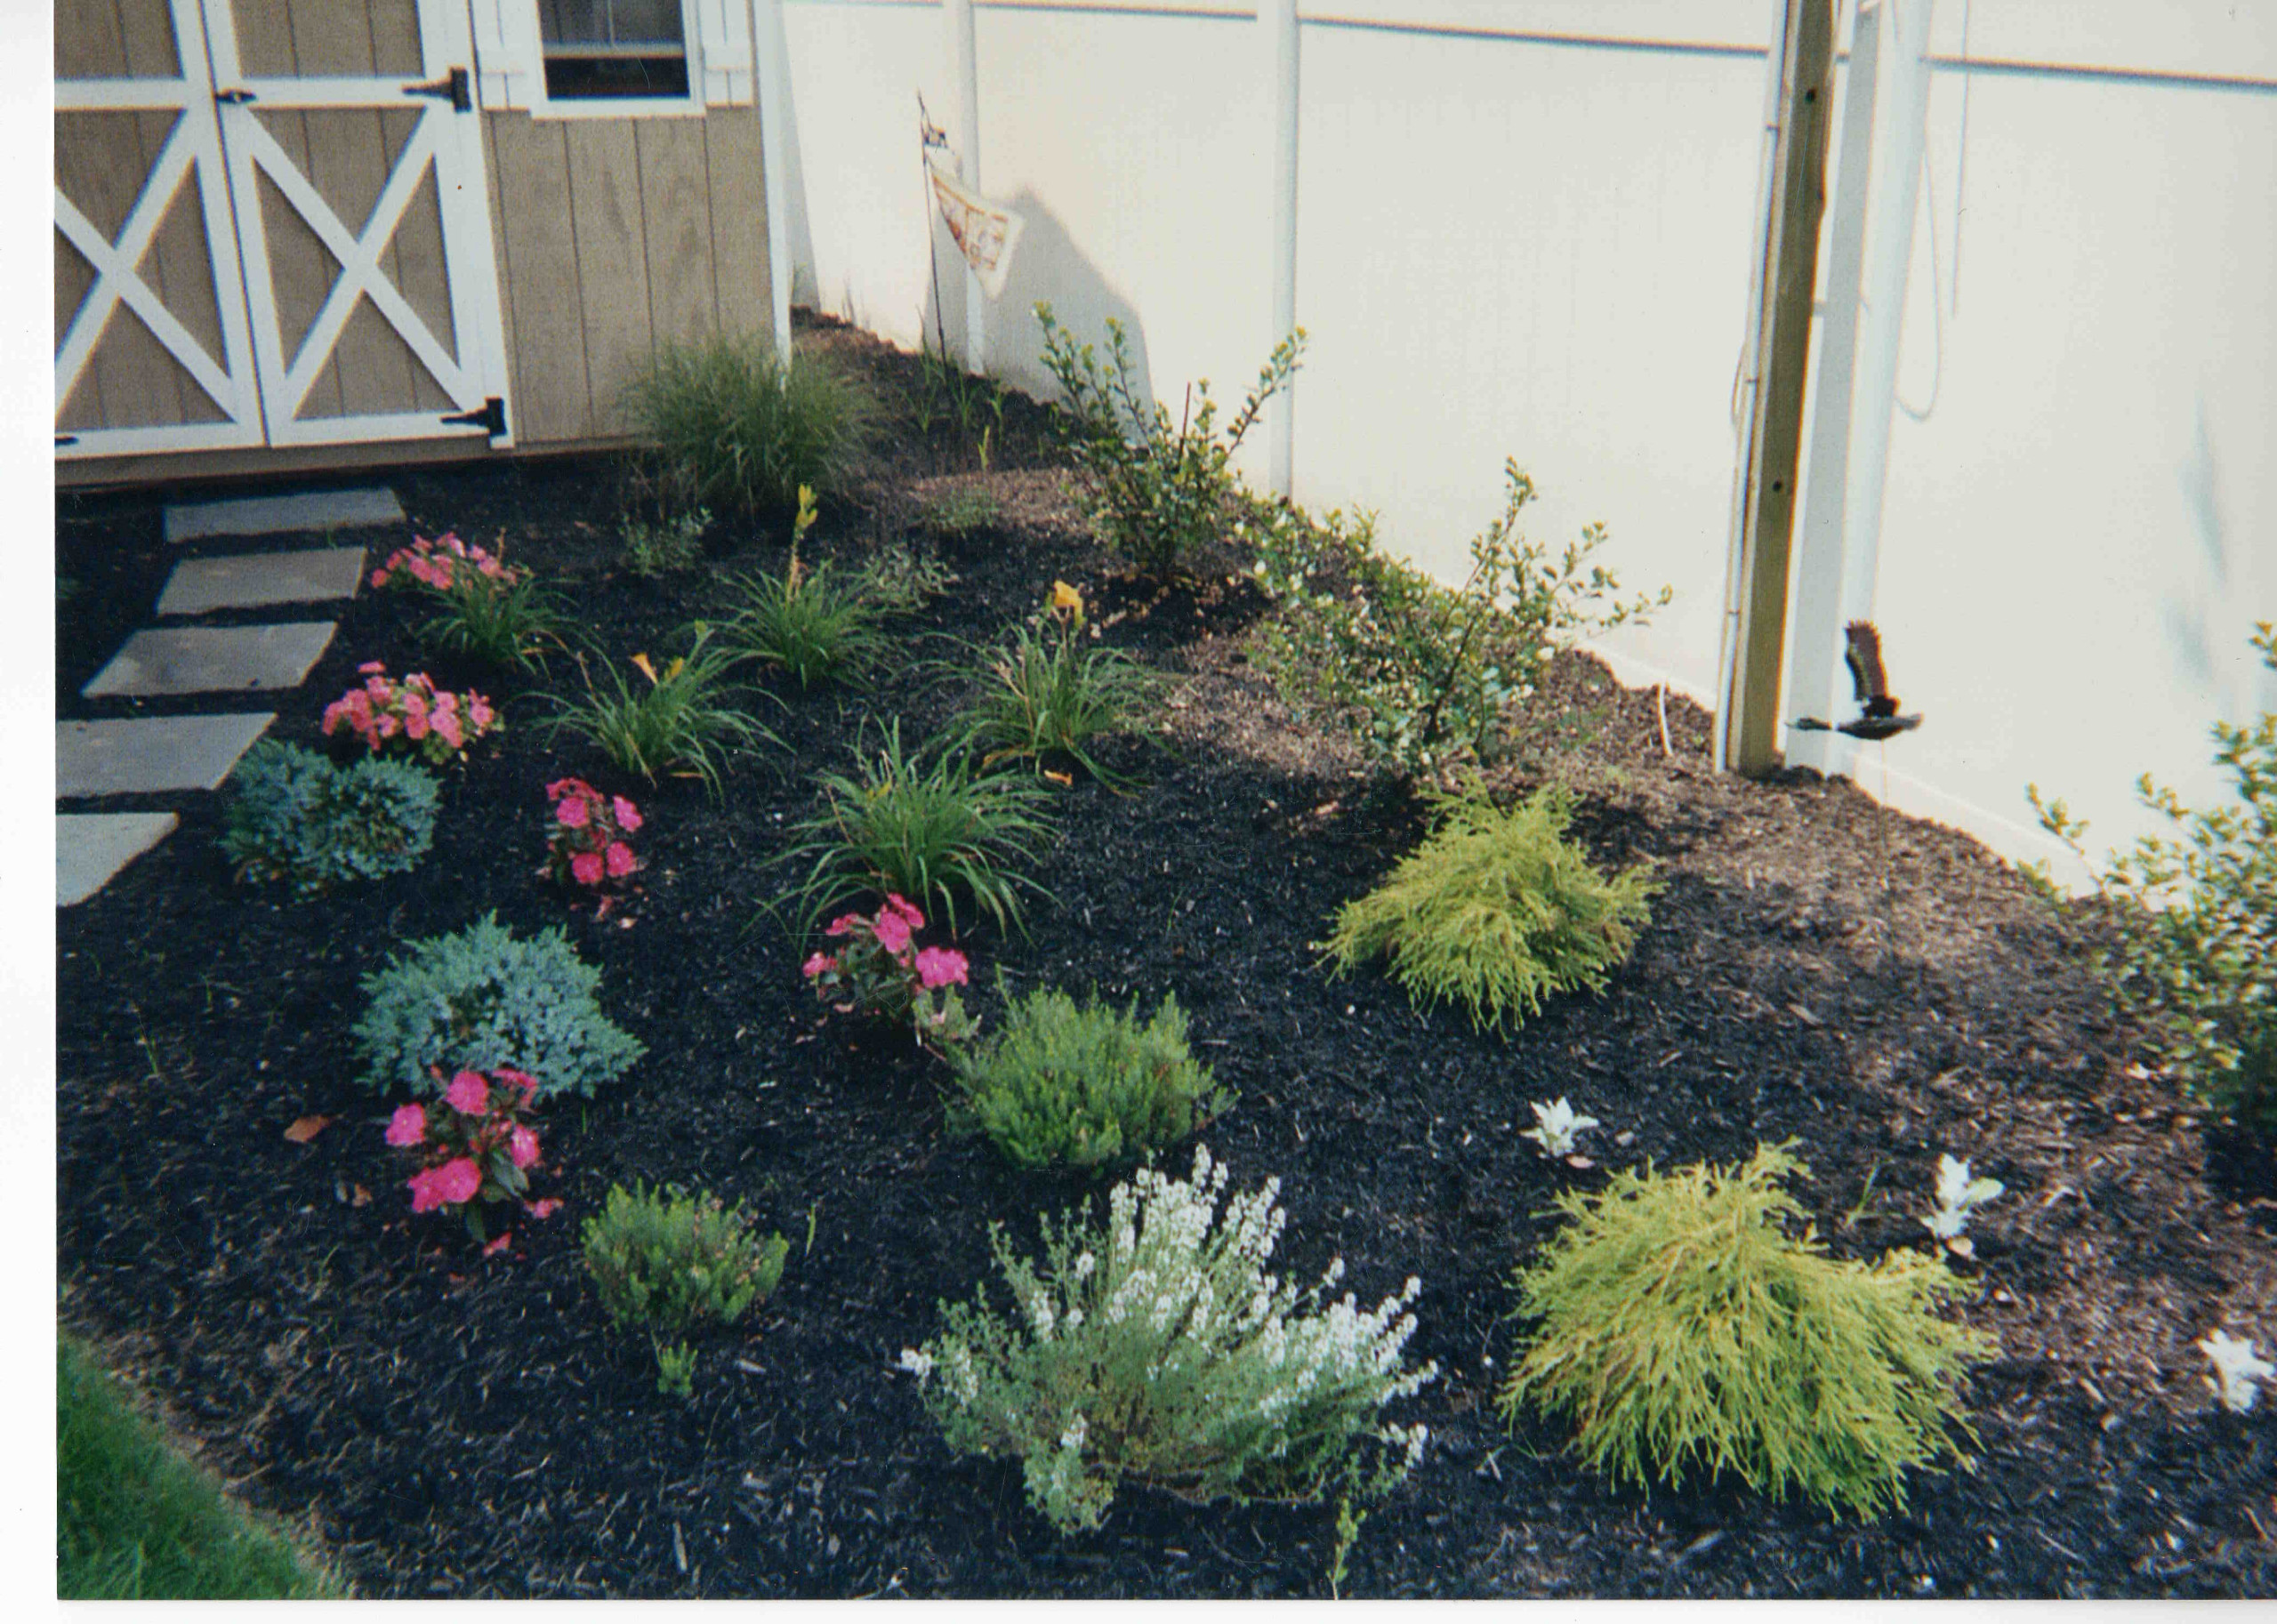 Backyard Garden planting with evergreens, perennials and annuals.